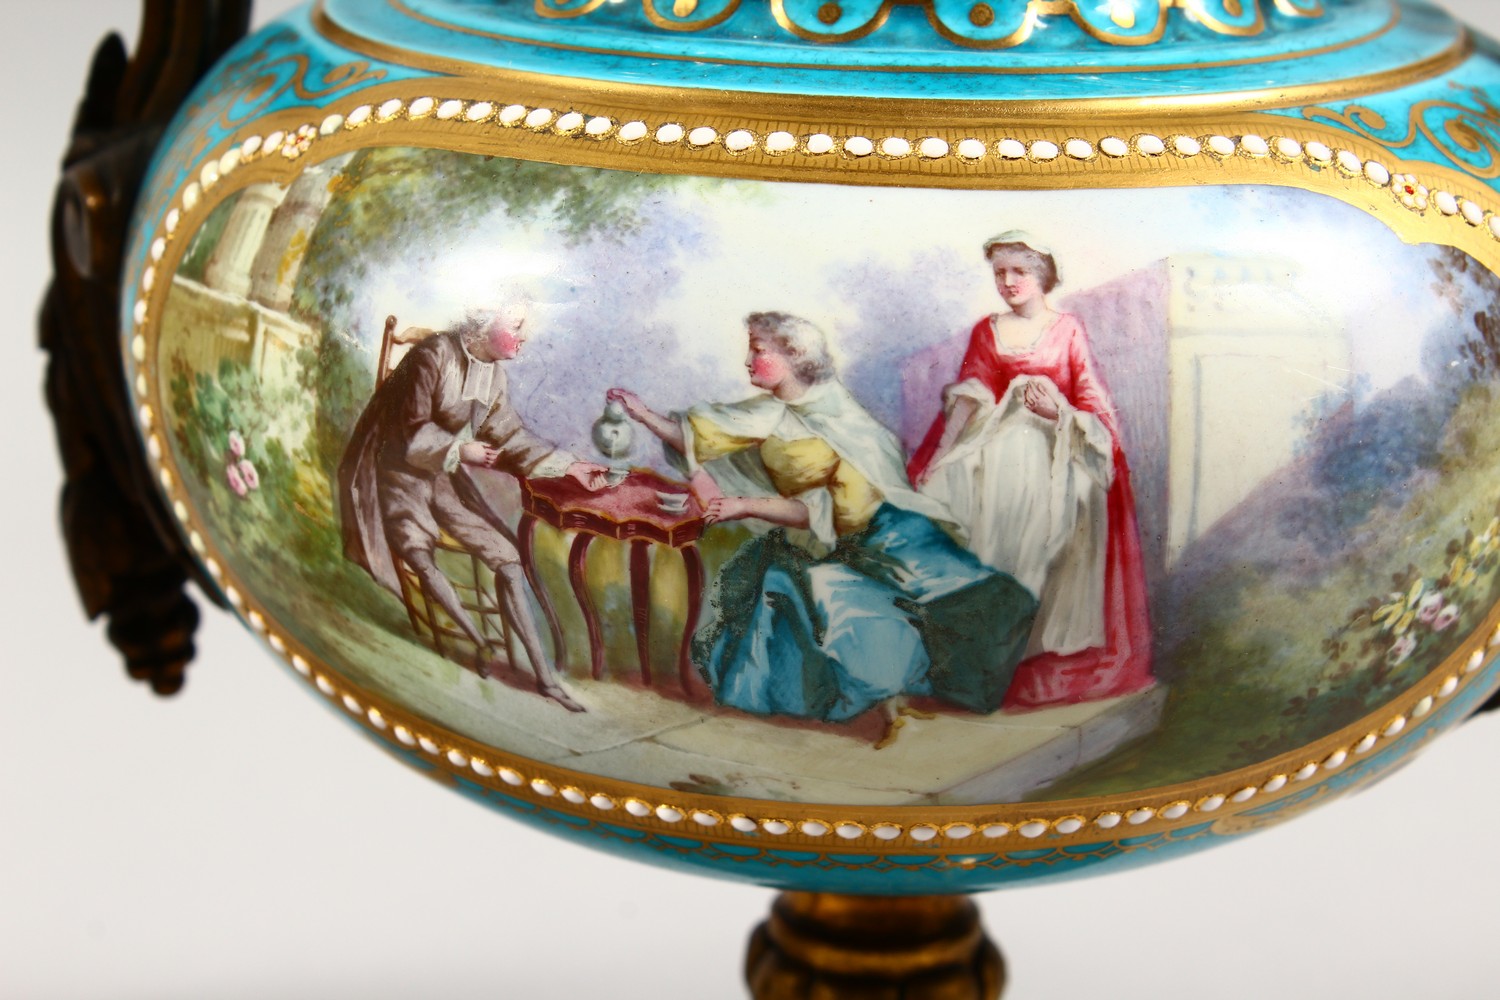 A SUPERB PAIR OF 19TH CENTURY SEVRES PORCELAIN URNS AND COVERS, pale blue ground, painted with - Image 11 of 14